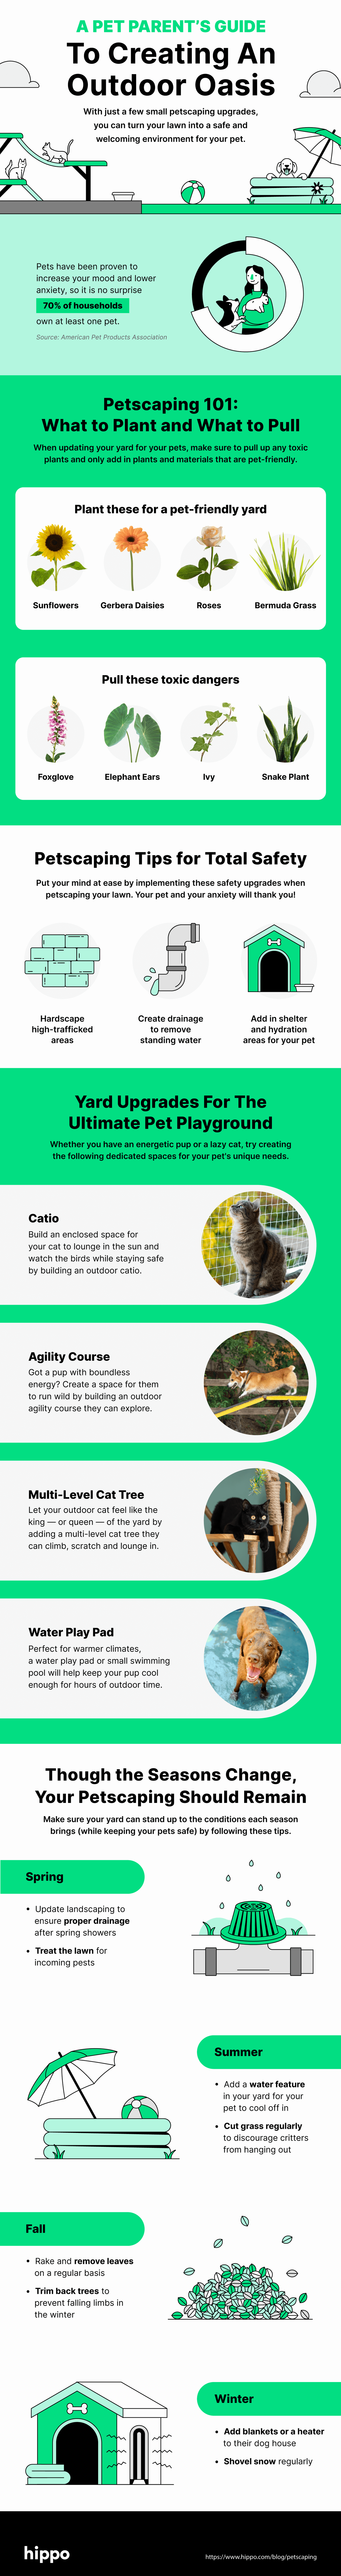 Infographic depicting things to consider when creating an outdoor oasis for pets